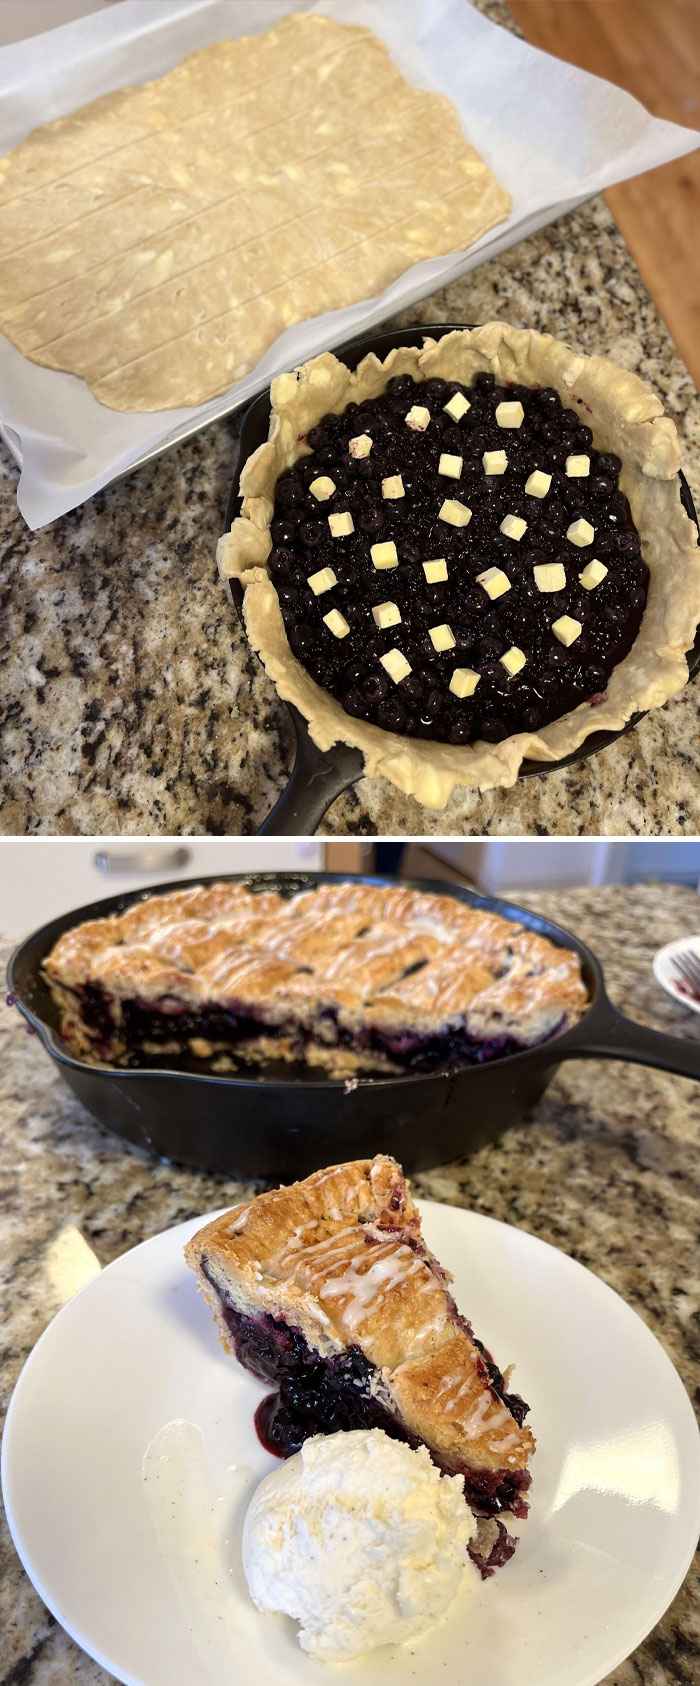 I'm Very Lucky My Birthday Is On Pi Day Because It's A Great Excuse To Make Pie Instead Of A Cake. Happy Pi Day 